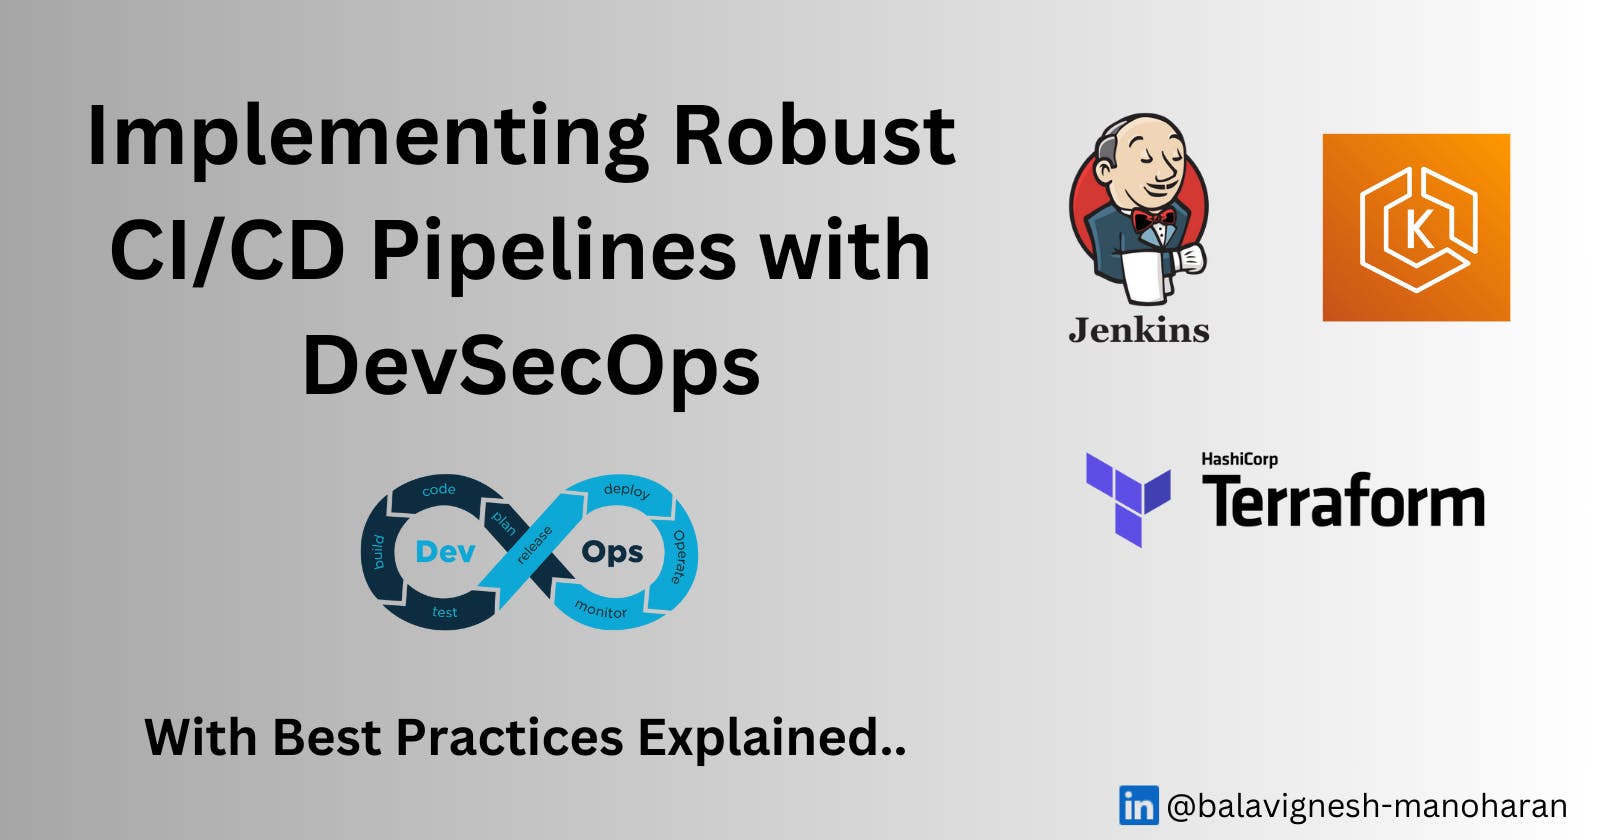 Mastering DevSecOps CI/CD: Building and Securing Your Own Hotstar Replica